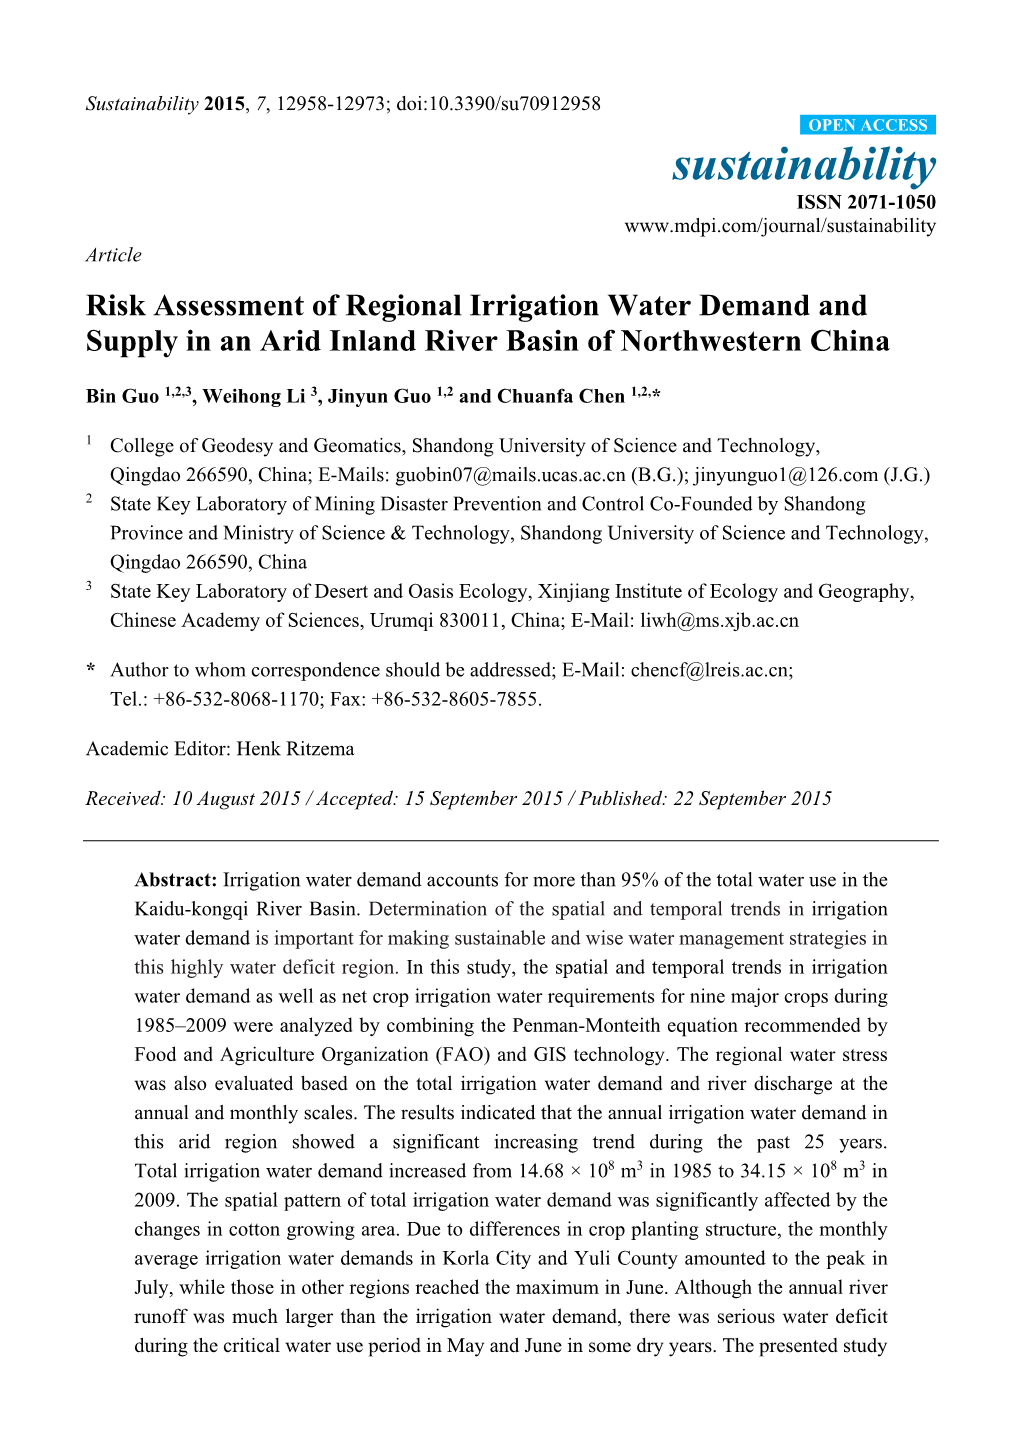 Risk Assessment of Regional Irrigation Water Demand and Supply in an Arid Inland River Basin of Northwestern China